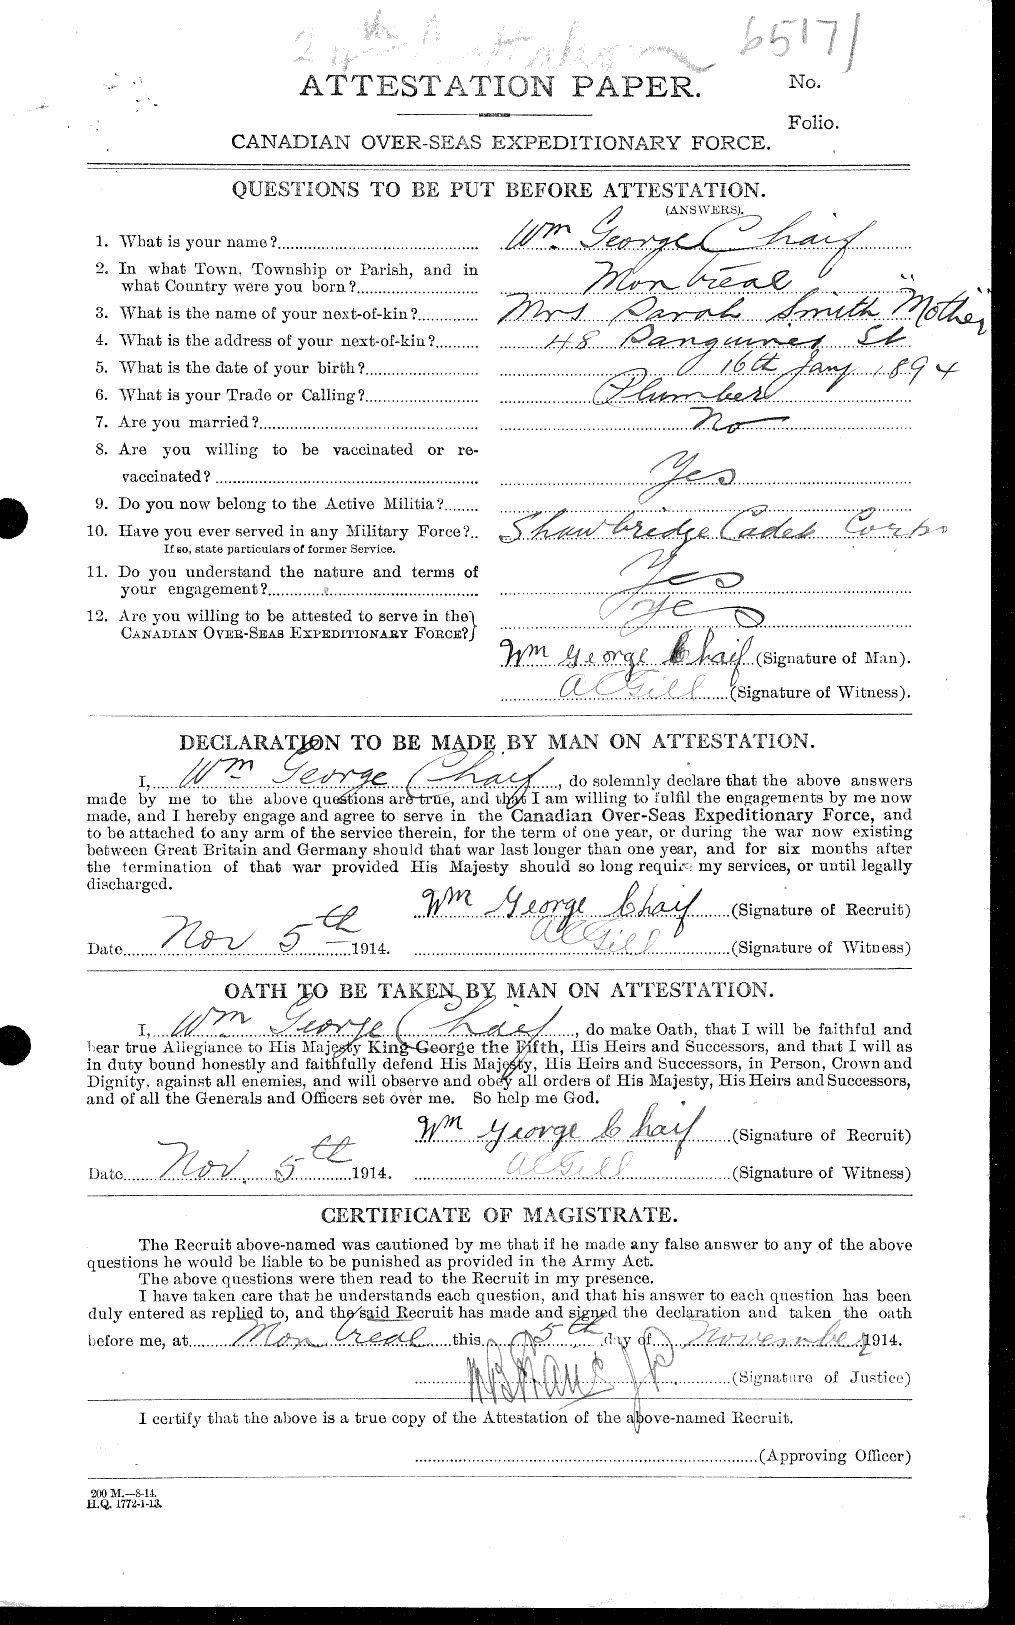 Personnel Records of the First World War - CEF 012284a